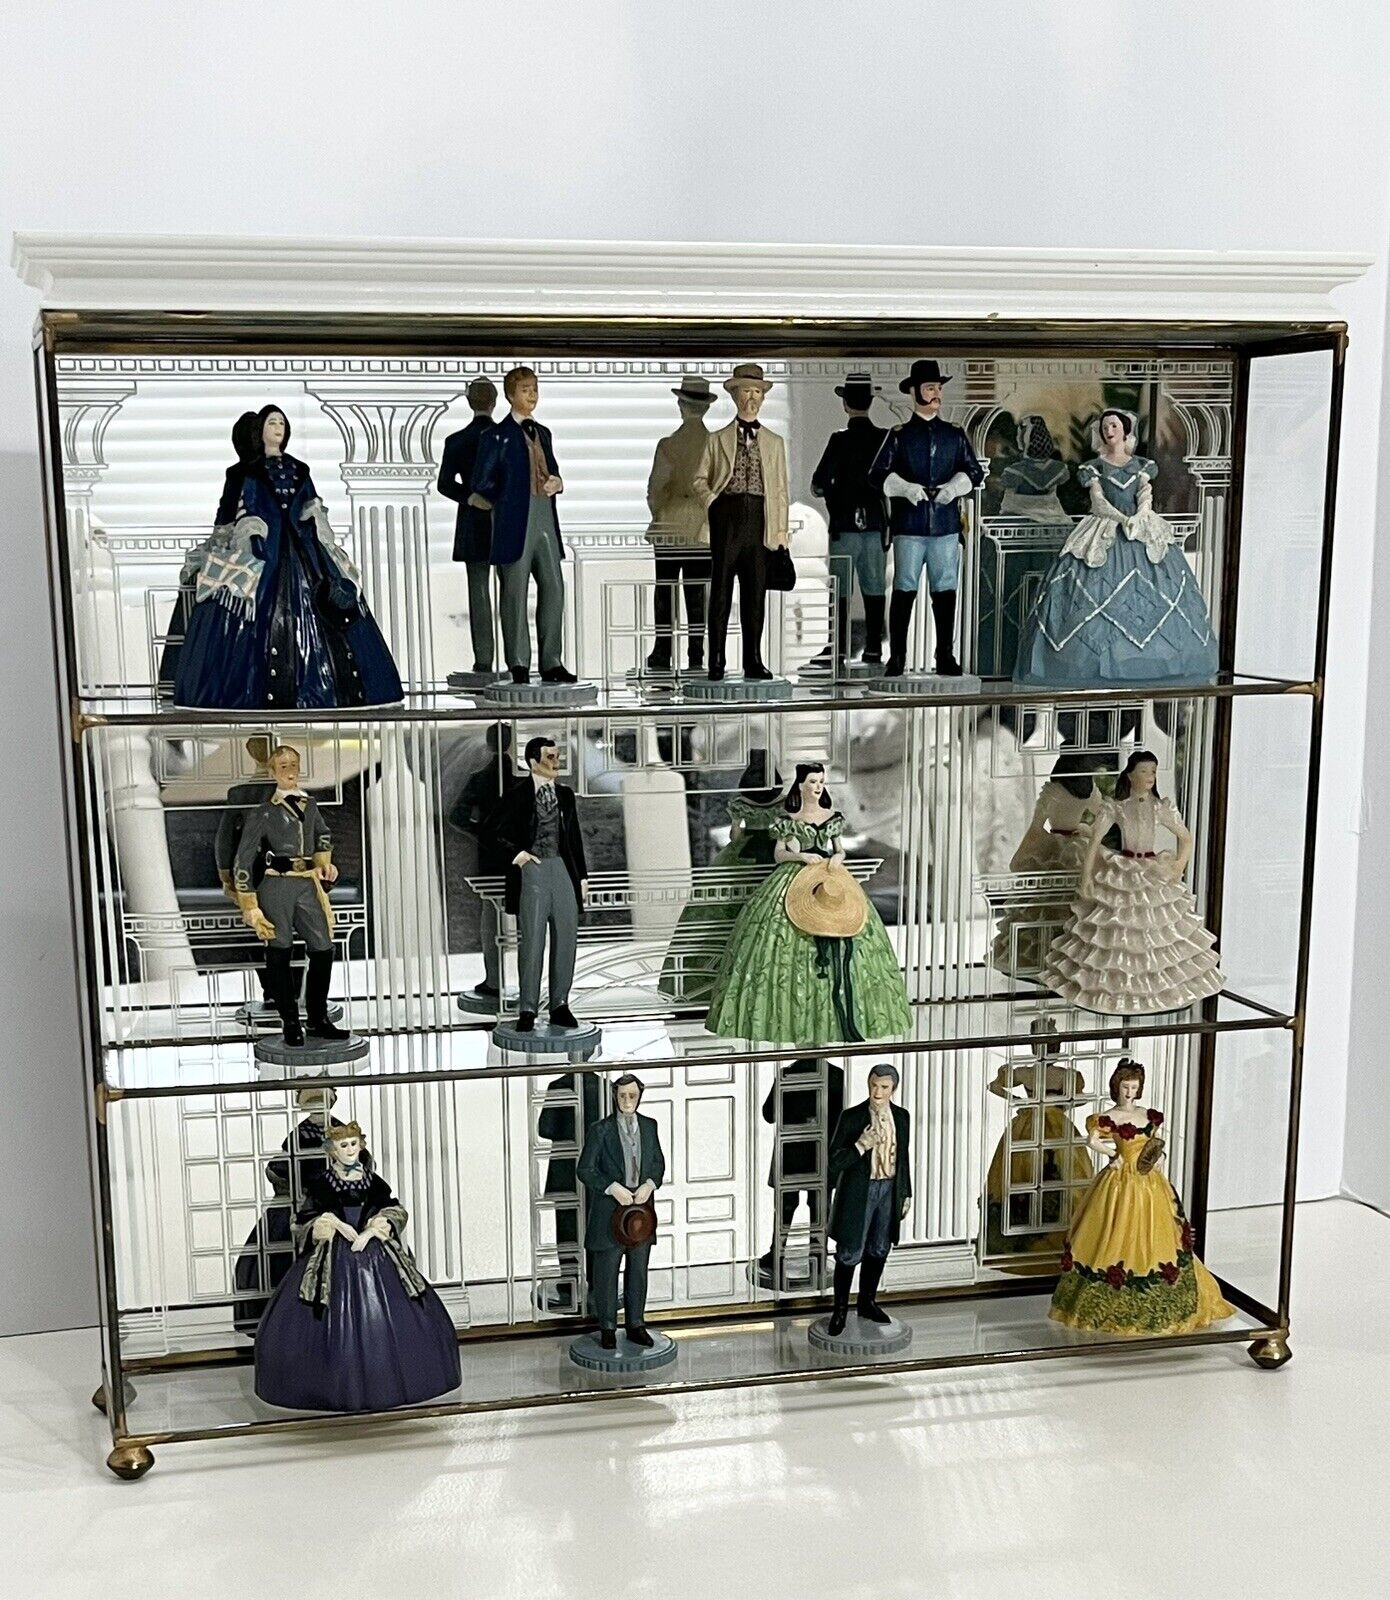 1990 Franklin Mint “Gone With the Wind” Collector 13 Figurine Set w/ Glass Tara